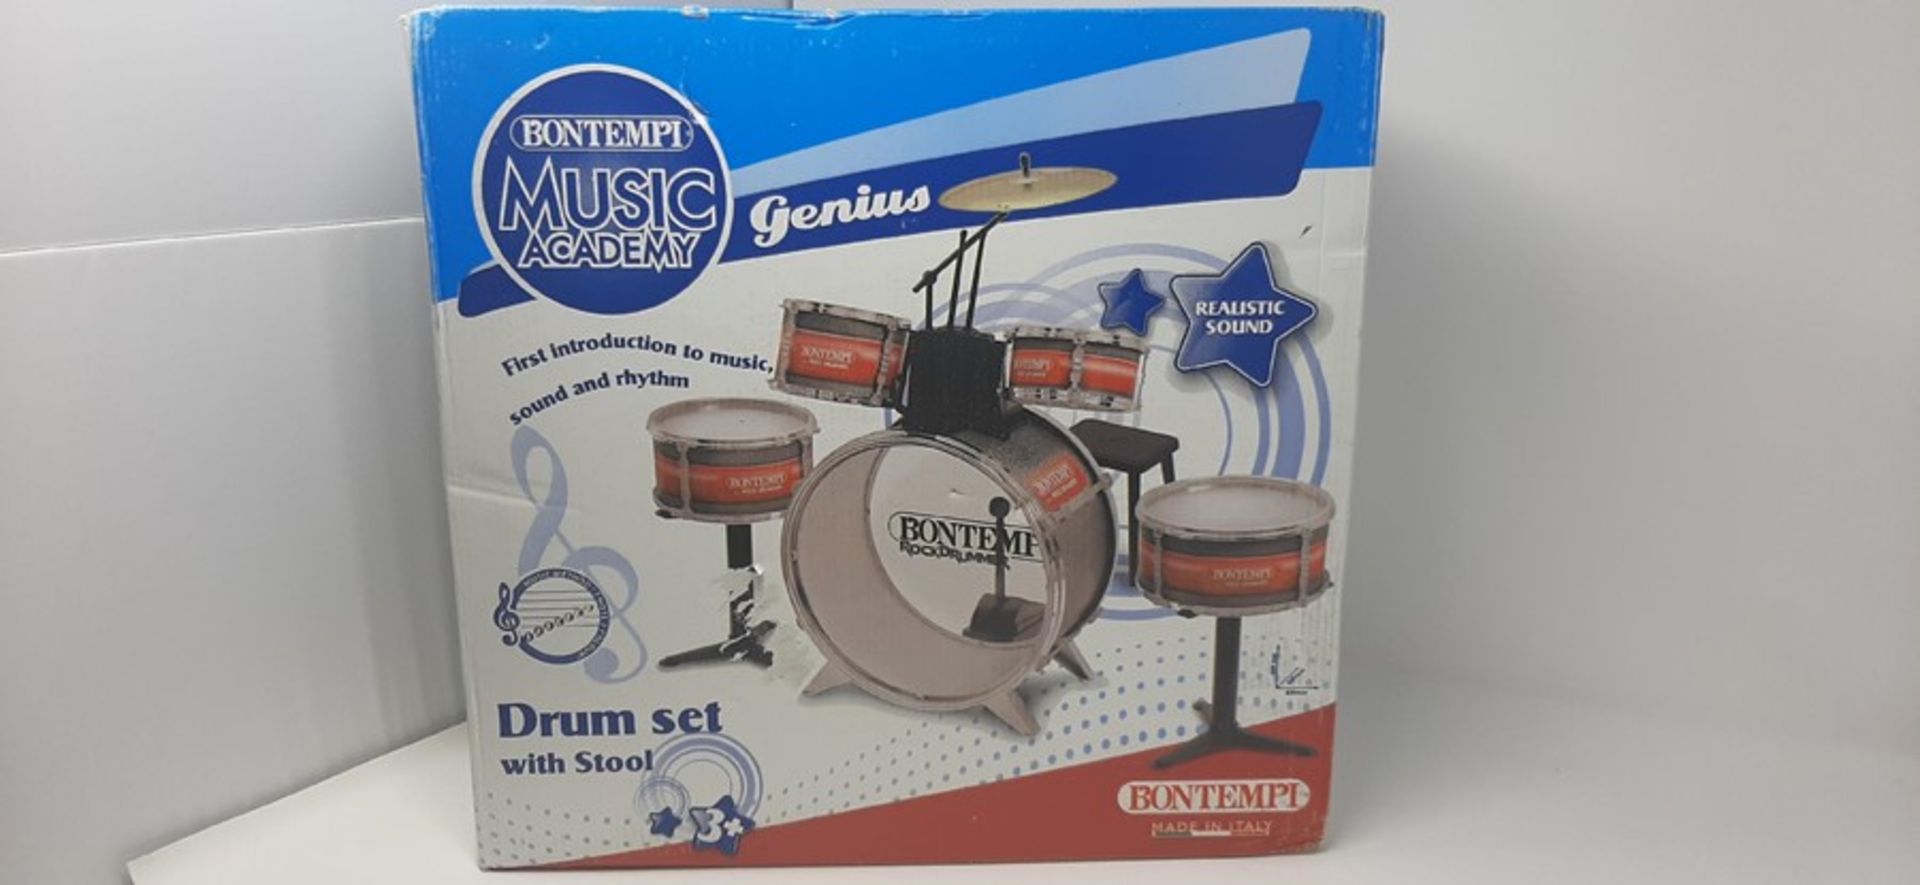 Bontempi 51 4830 6 Pieces Metallic Silver Drum Set with Stool, Multi-Color - Image 2 of 2